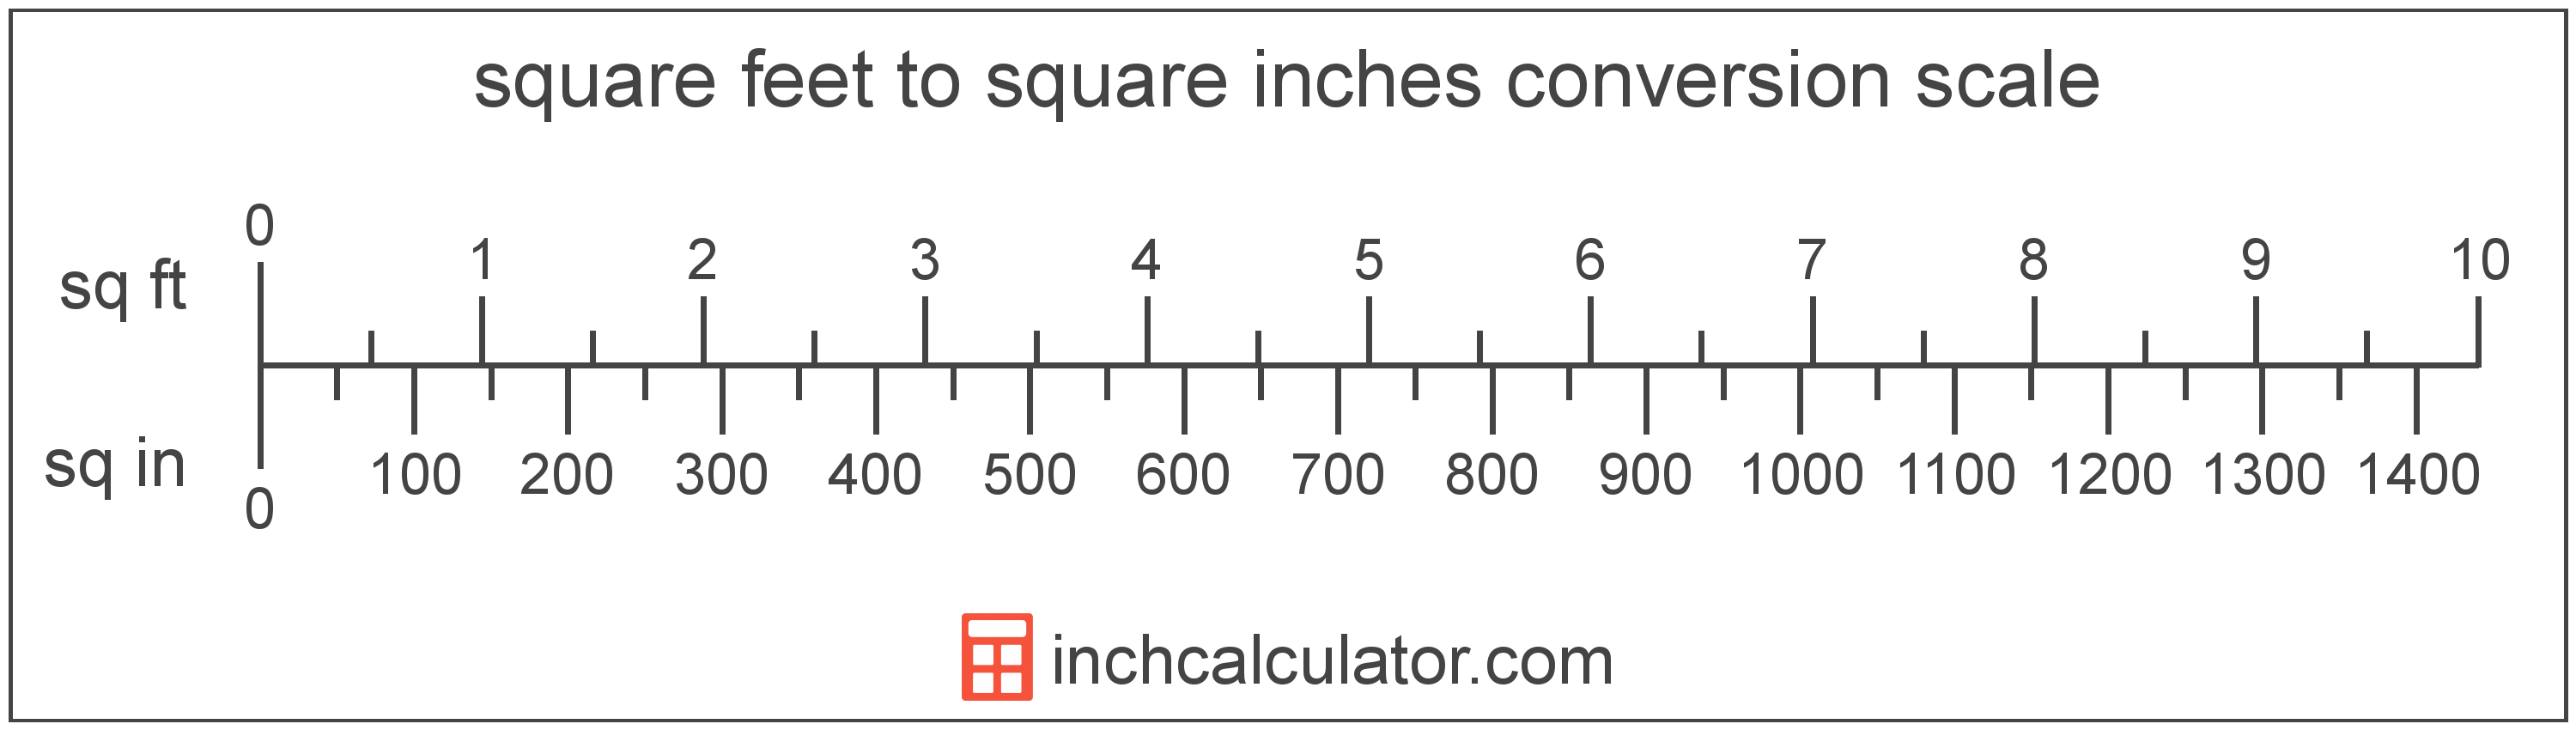 conversion scale showing square feet and equivalent square inches area values